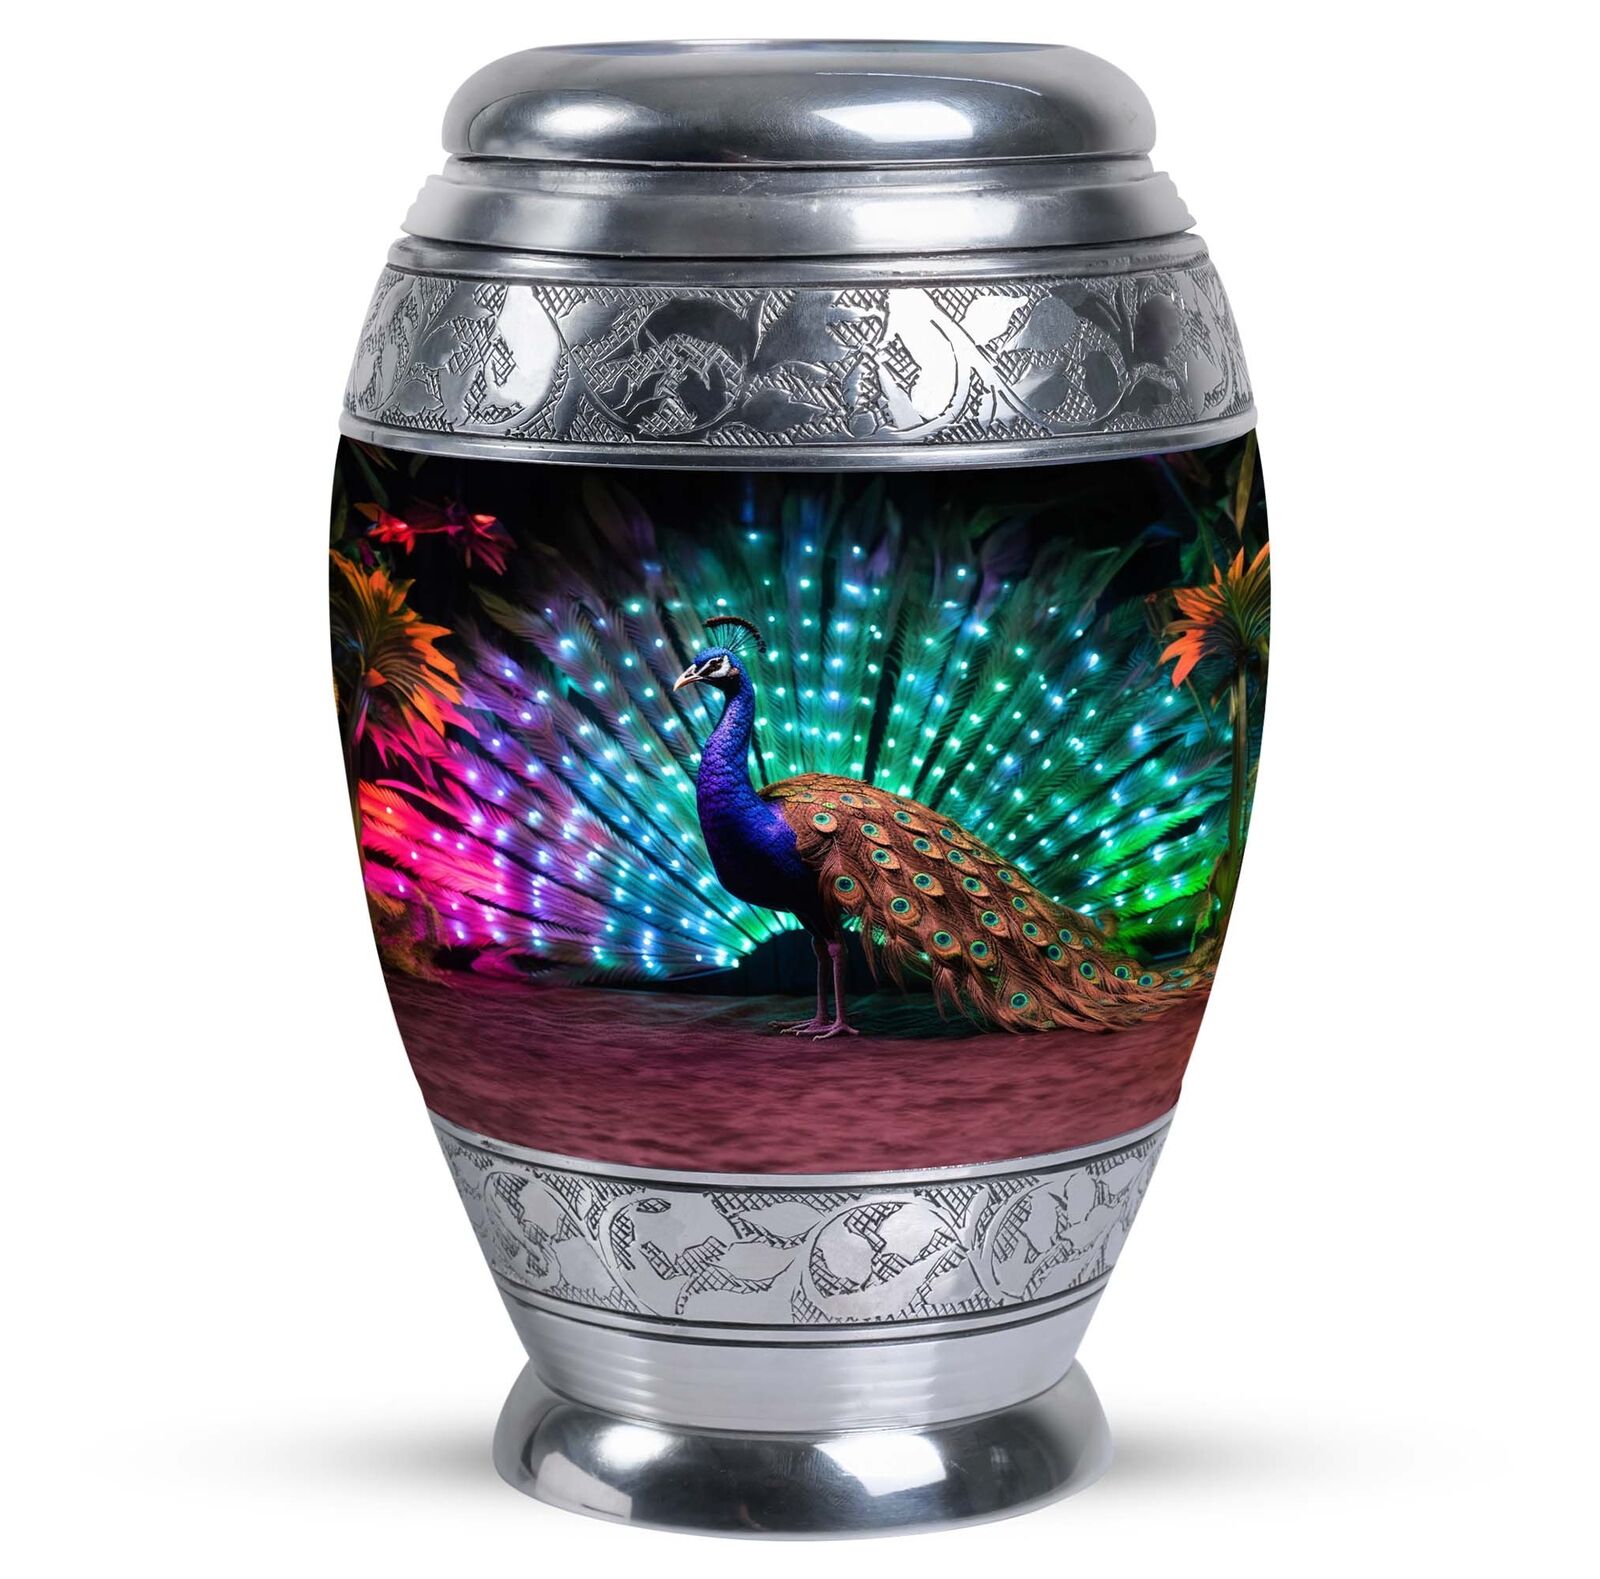 Eternal Rest - Peacock Cremation Urn for Cherished Memories